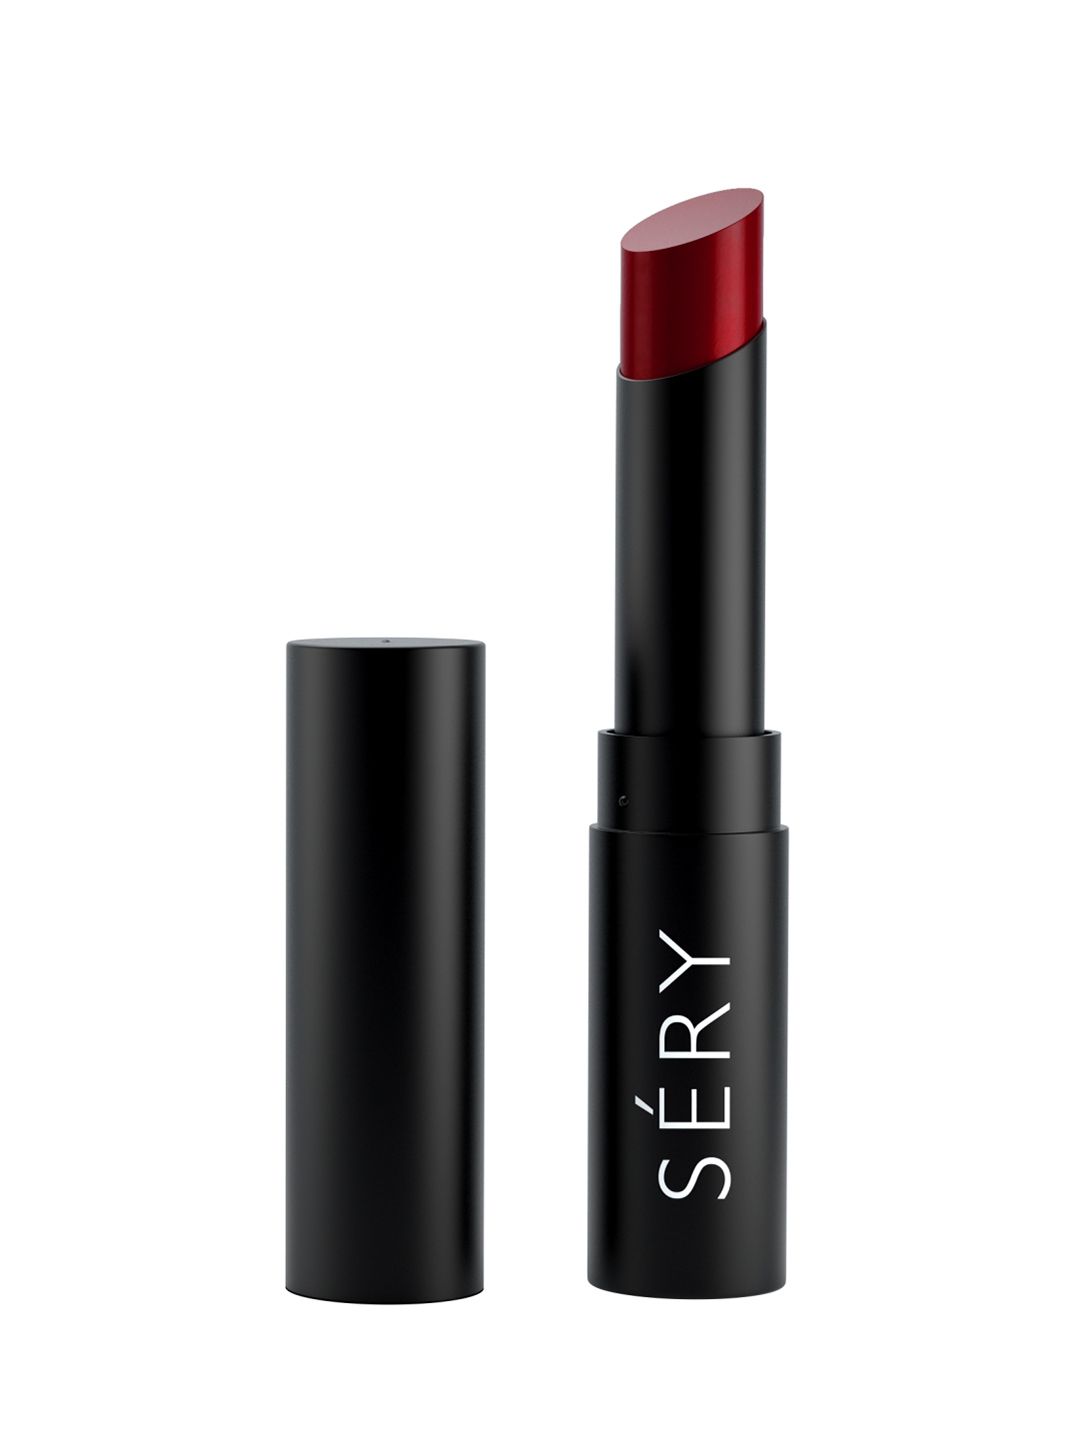 SERY Say Cheeez Creamy Matte Lip Color -Romantic Red CL04 Price in India